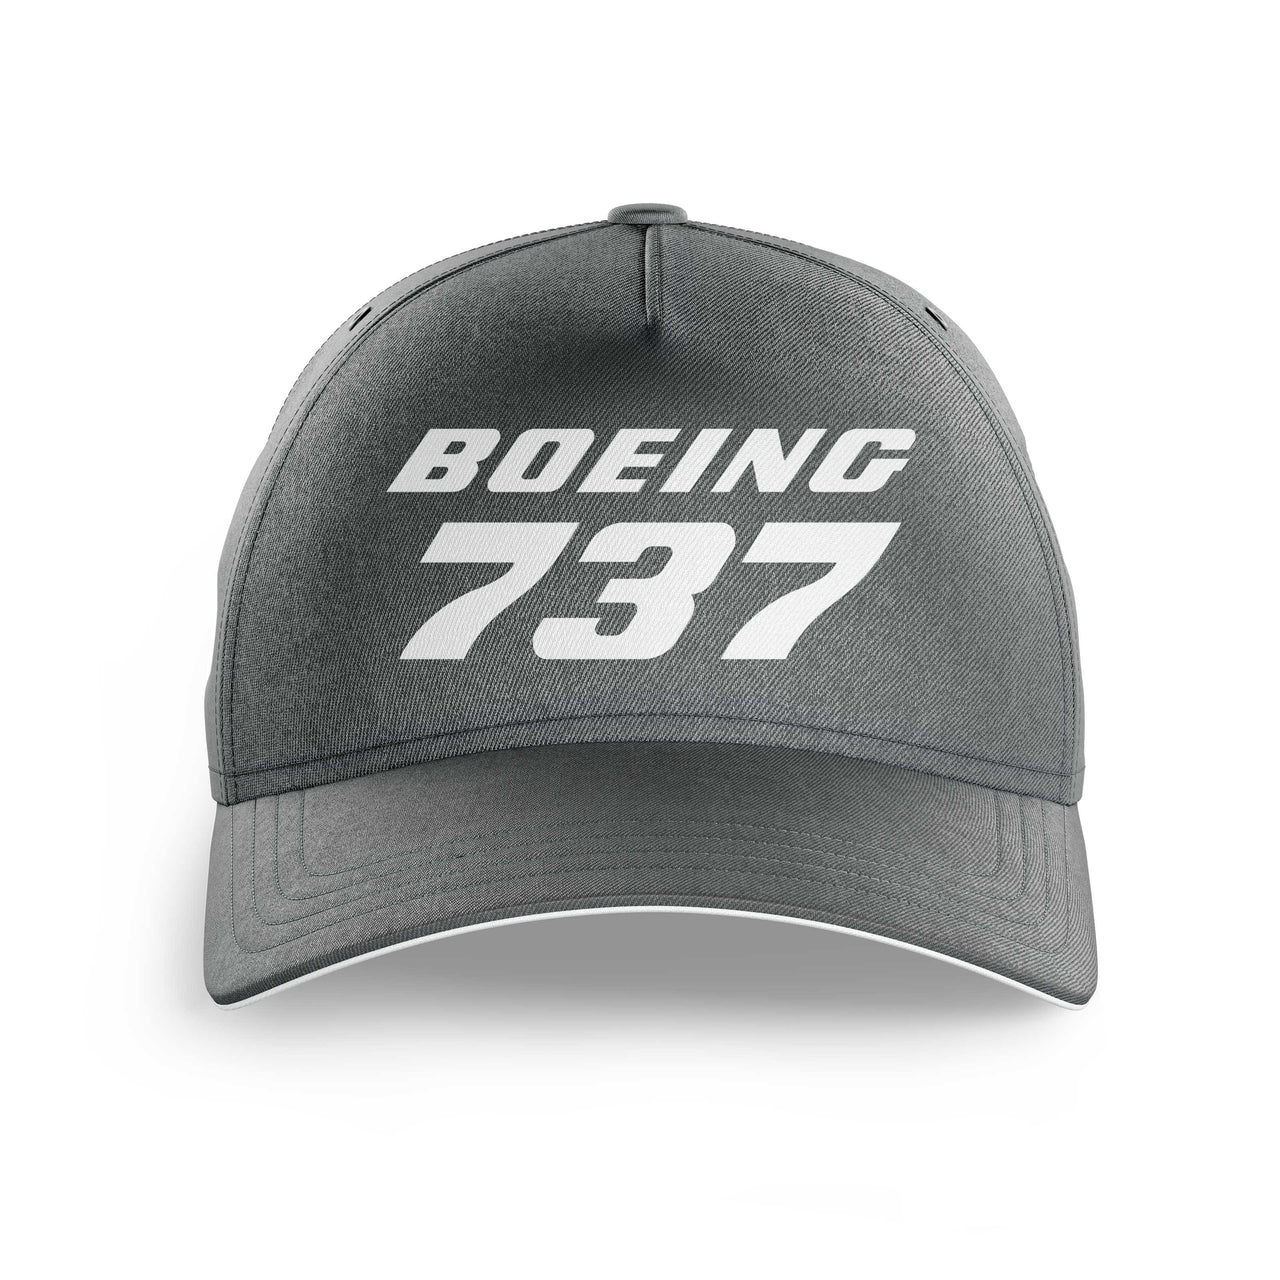 Boeing 737 & Text Printed Hats